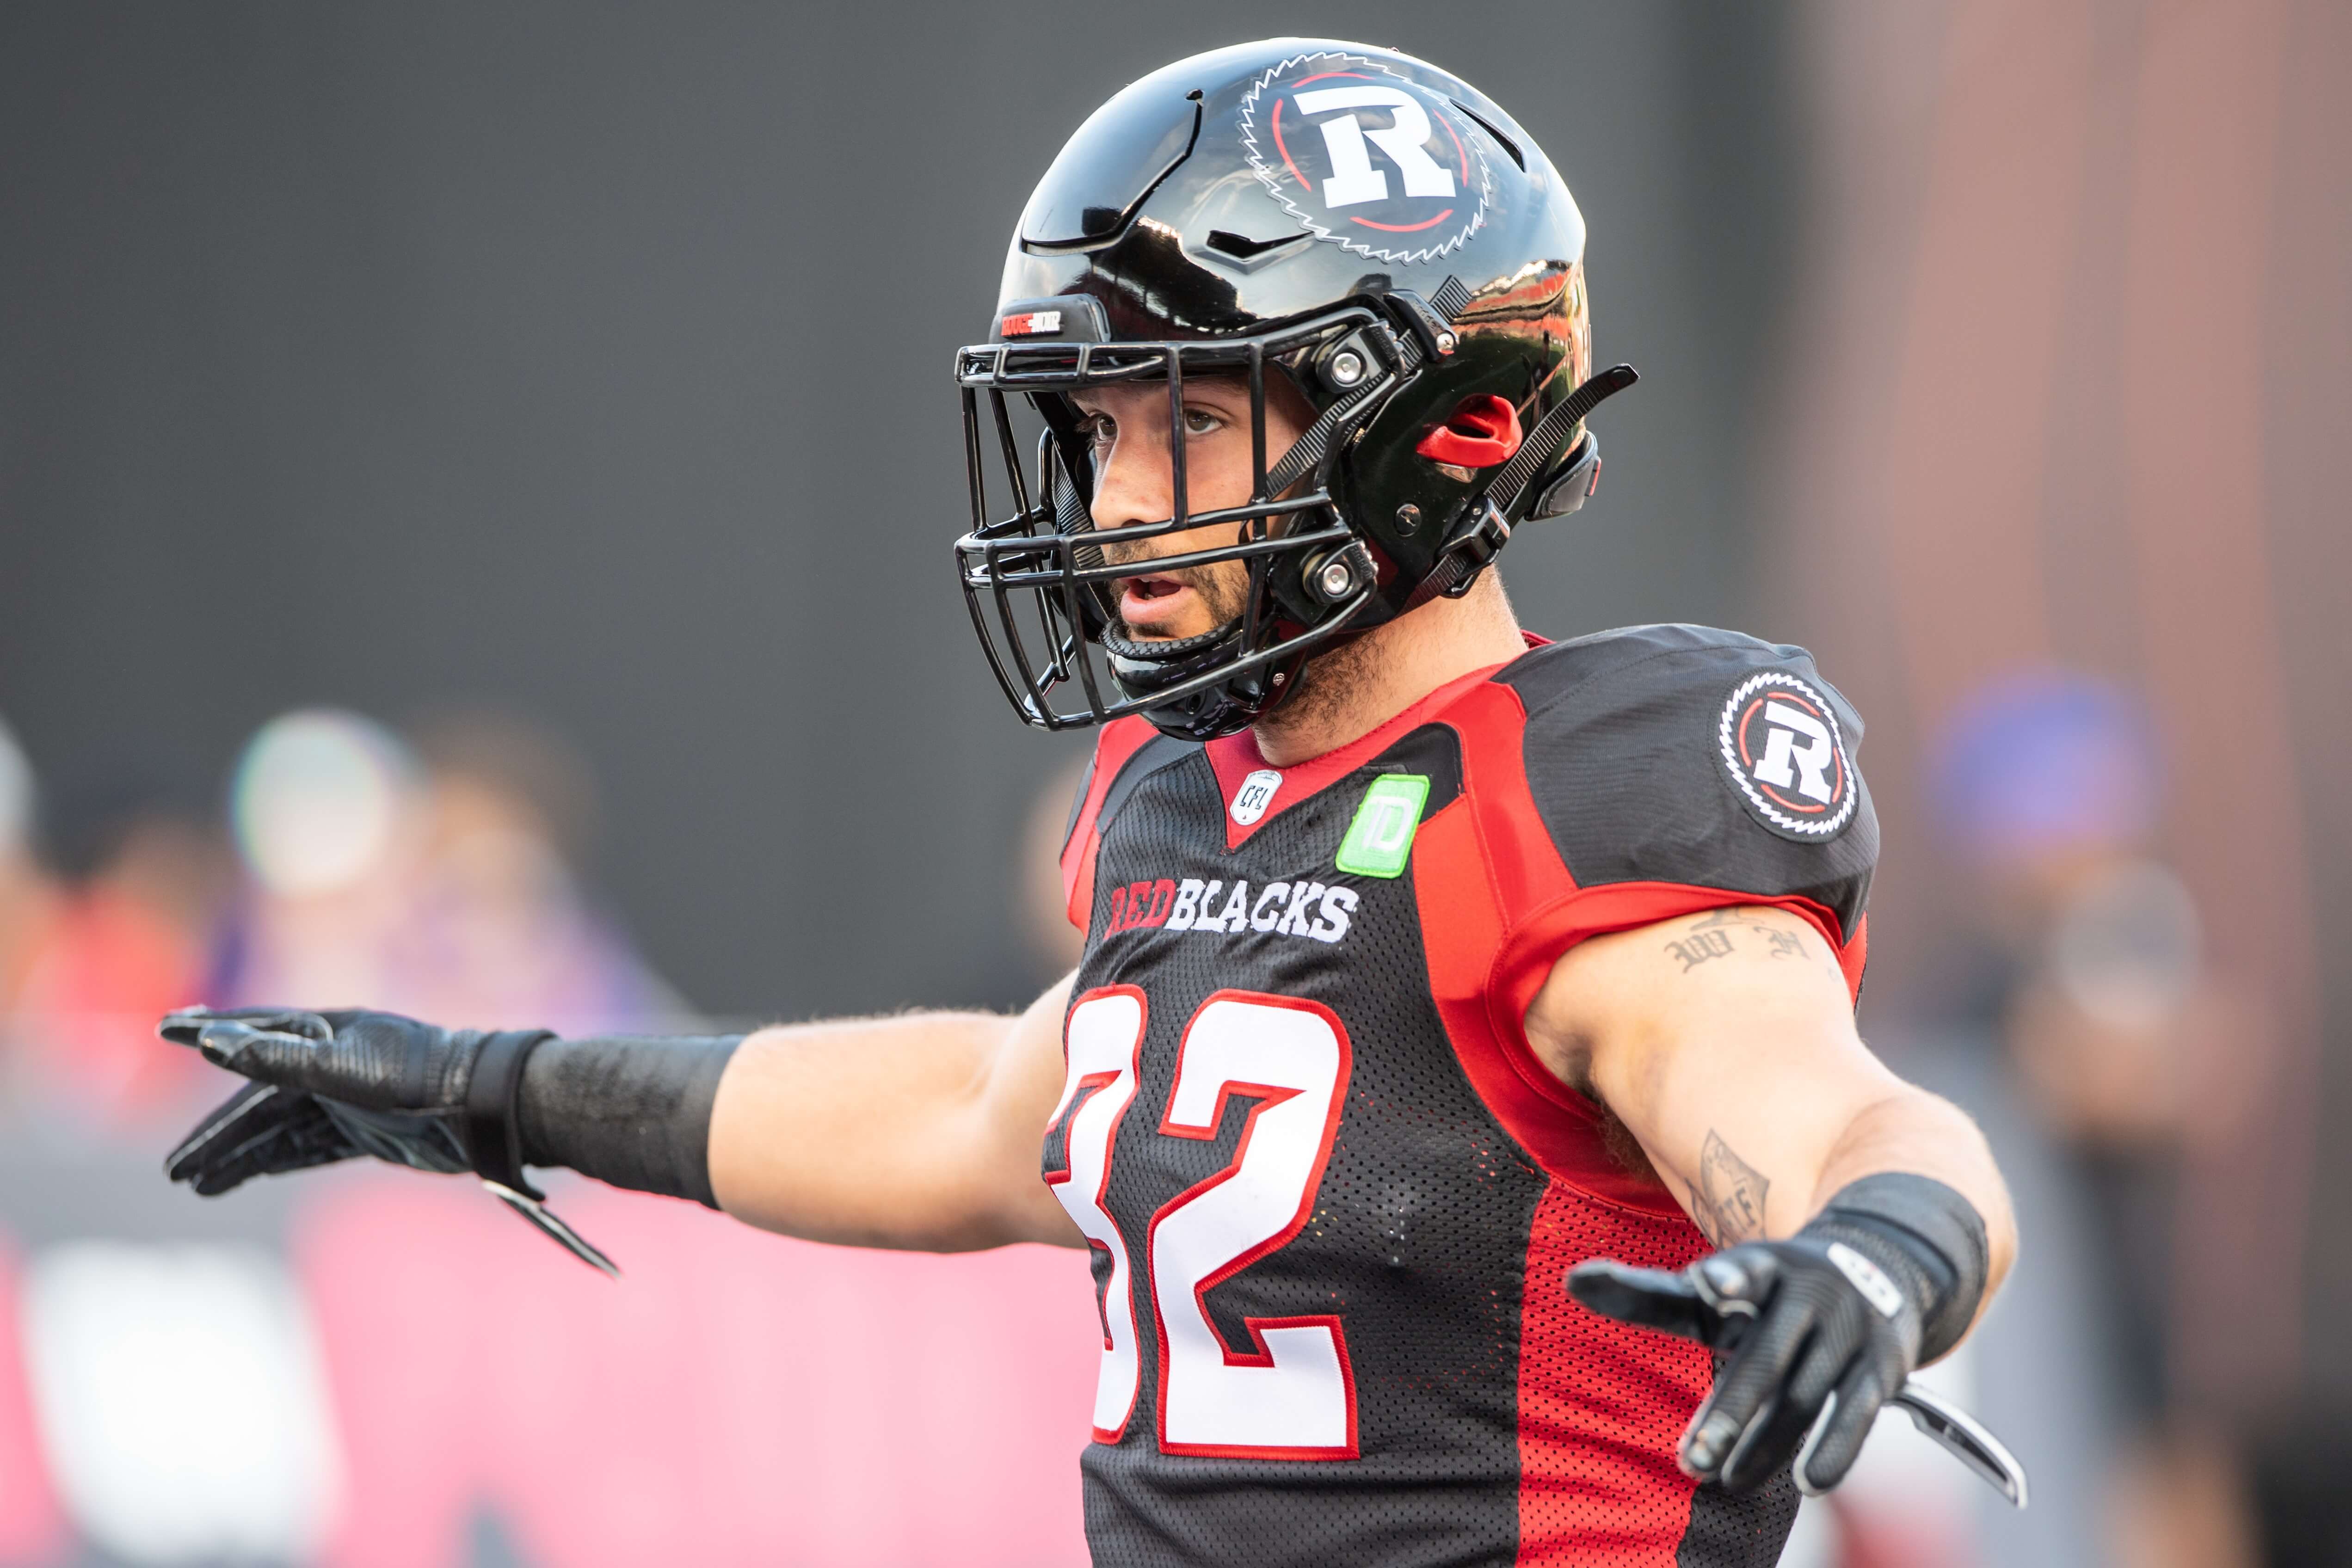 How To Bet - Redblacks vs Alouettes Predictions, Odds, and Picks Week 18: Redblacks Attack Gets Back on Track